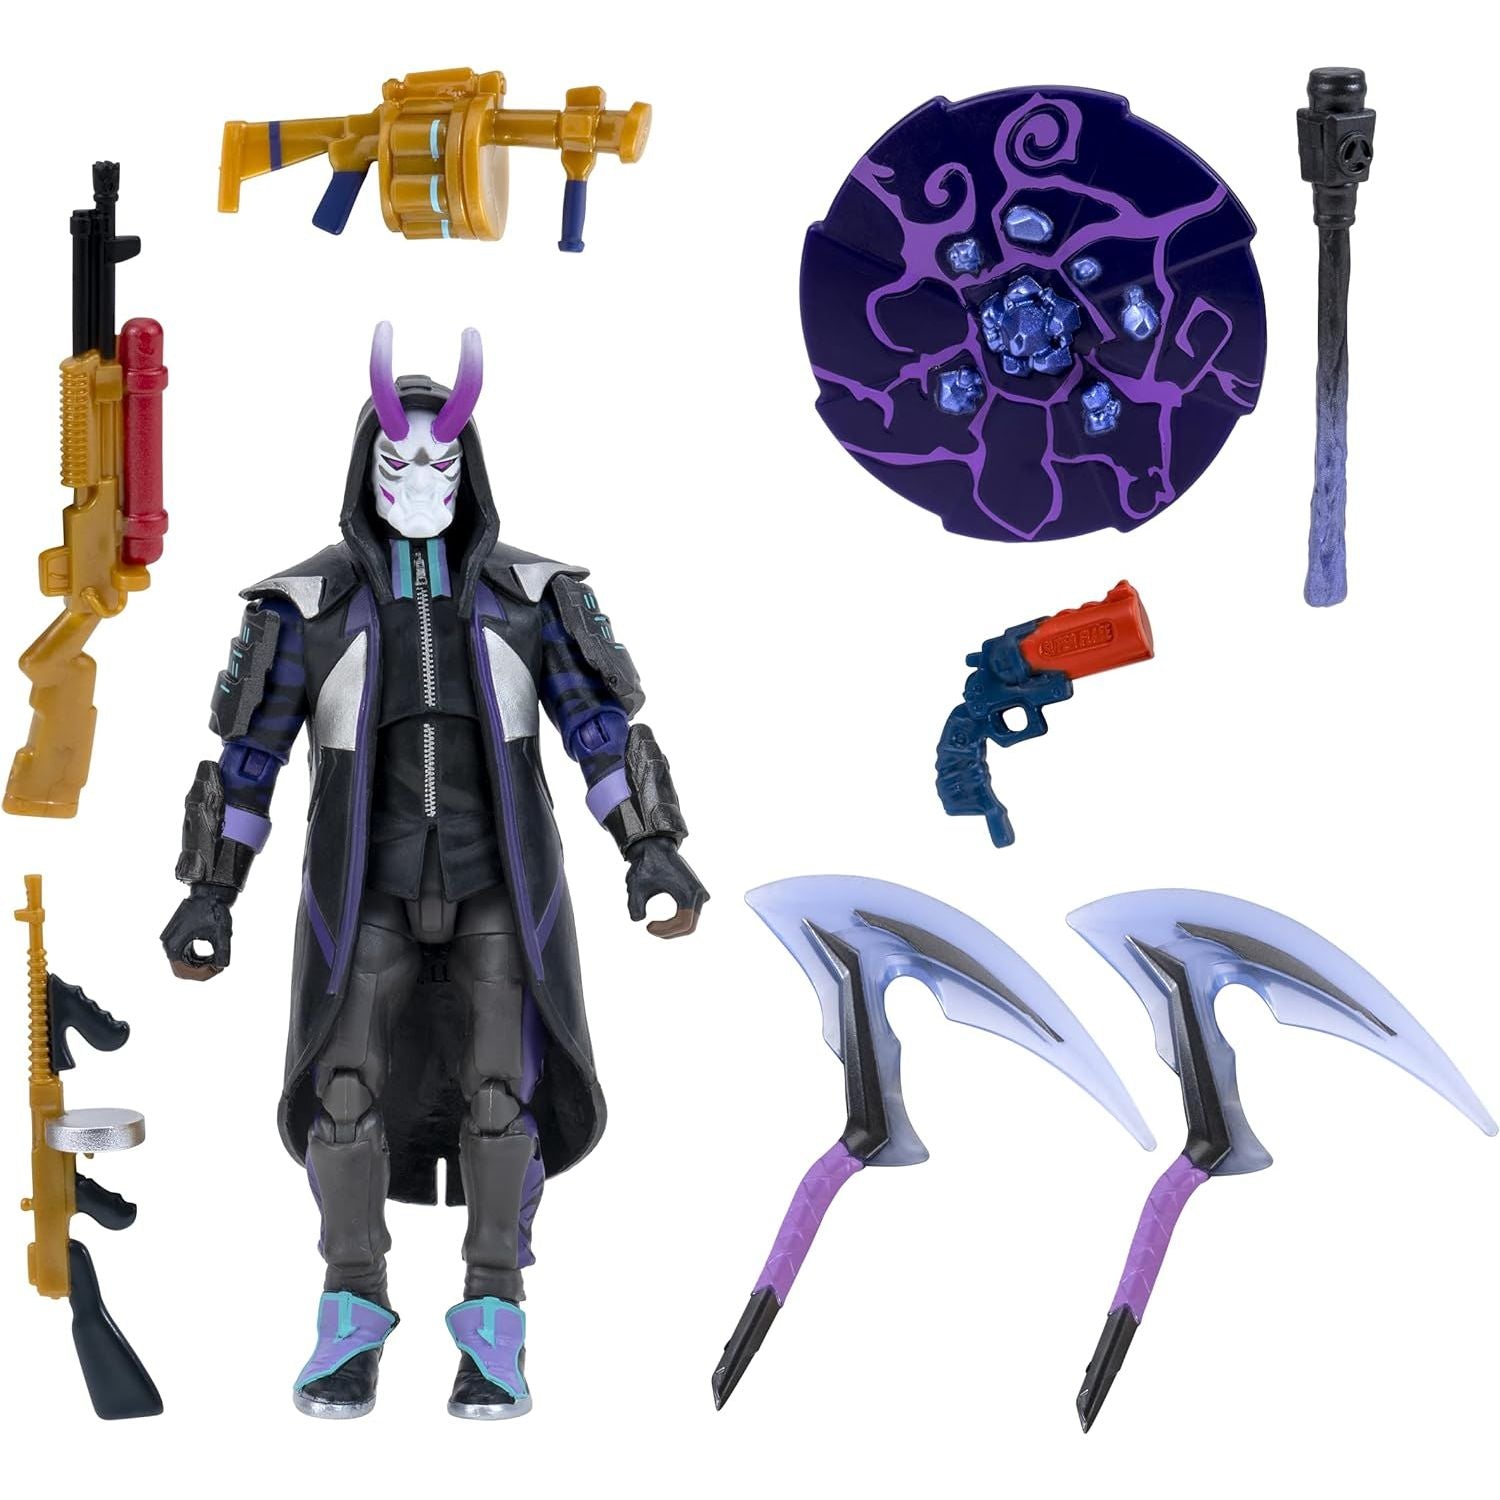 Fortnite Hot Drop Assortment, with 4-inch Fade-Masked Figure, Harvesting Tools, Umbrella, Back Bling, and Weapons